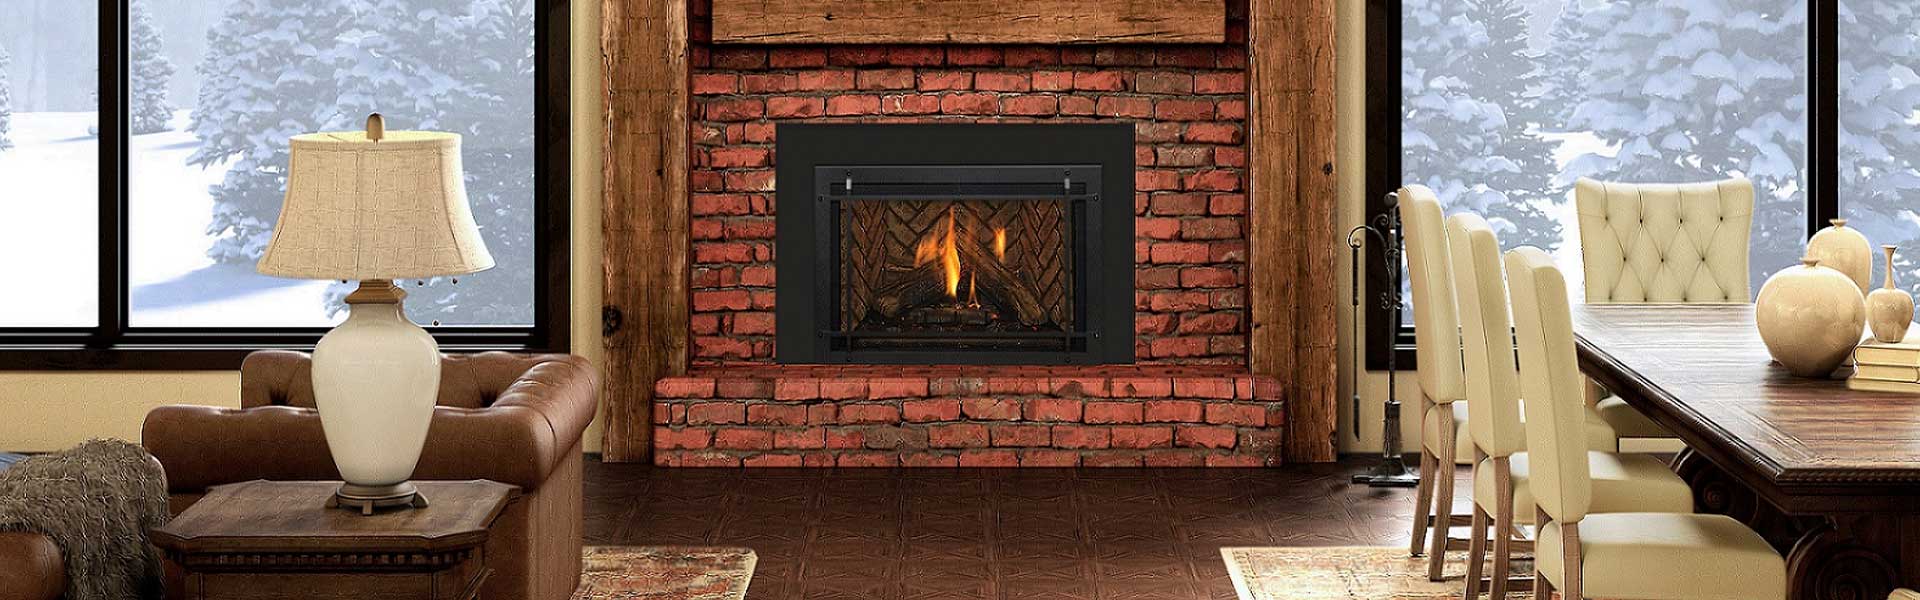 Fireplace Inserts Will Help You Save On Heating Costs